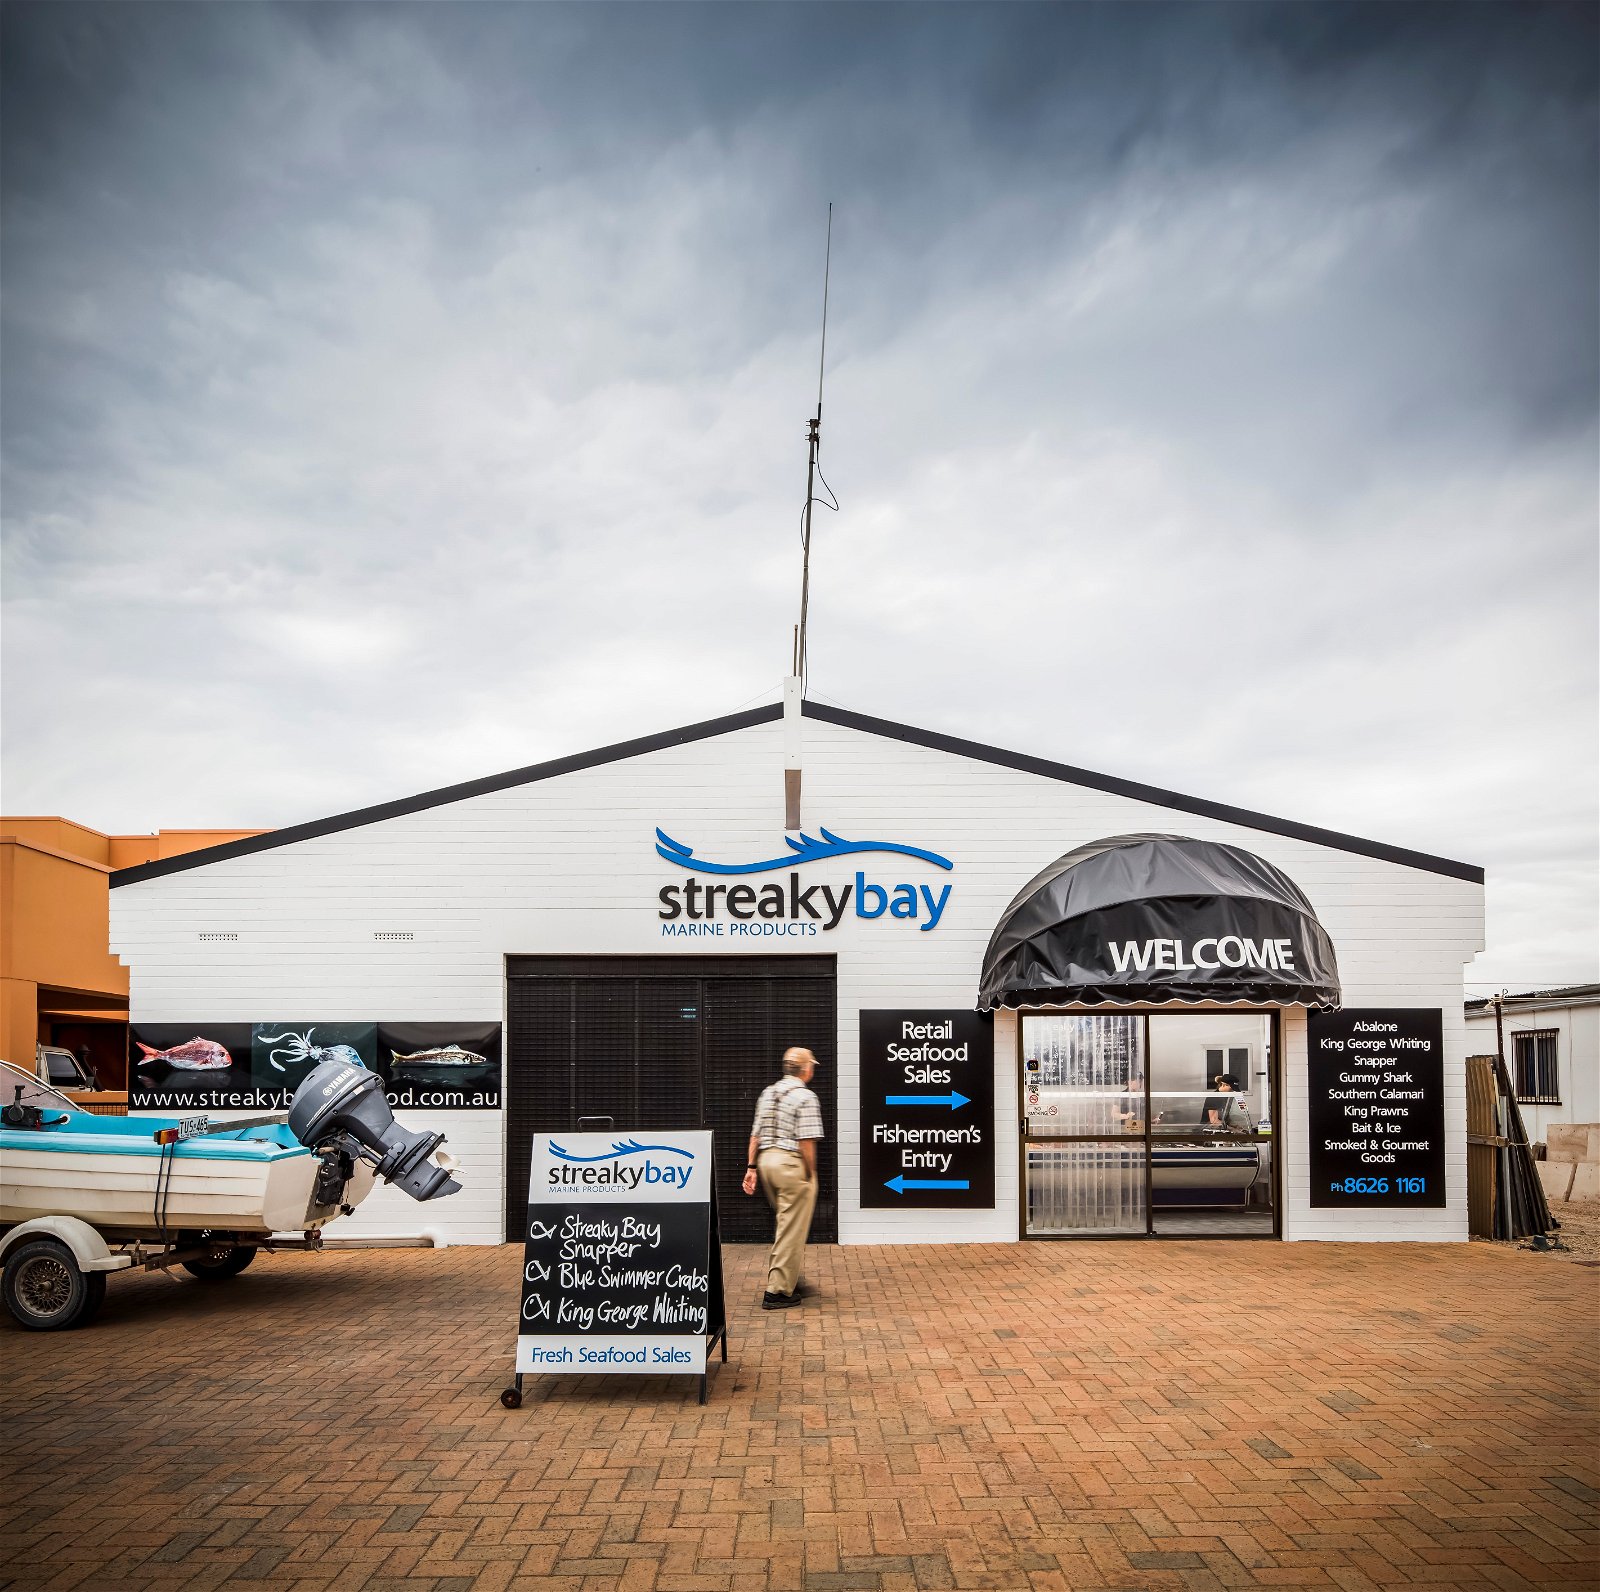 Streaky Bay Marine Products - Food Delivery Shop